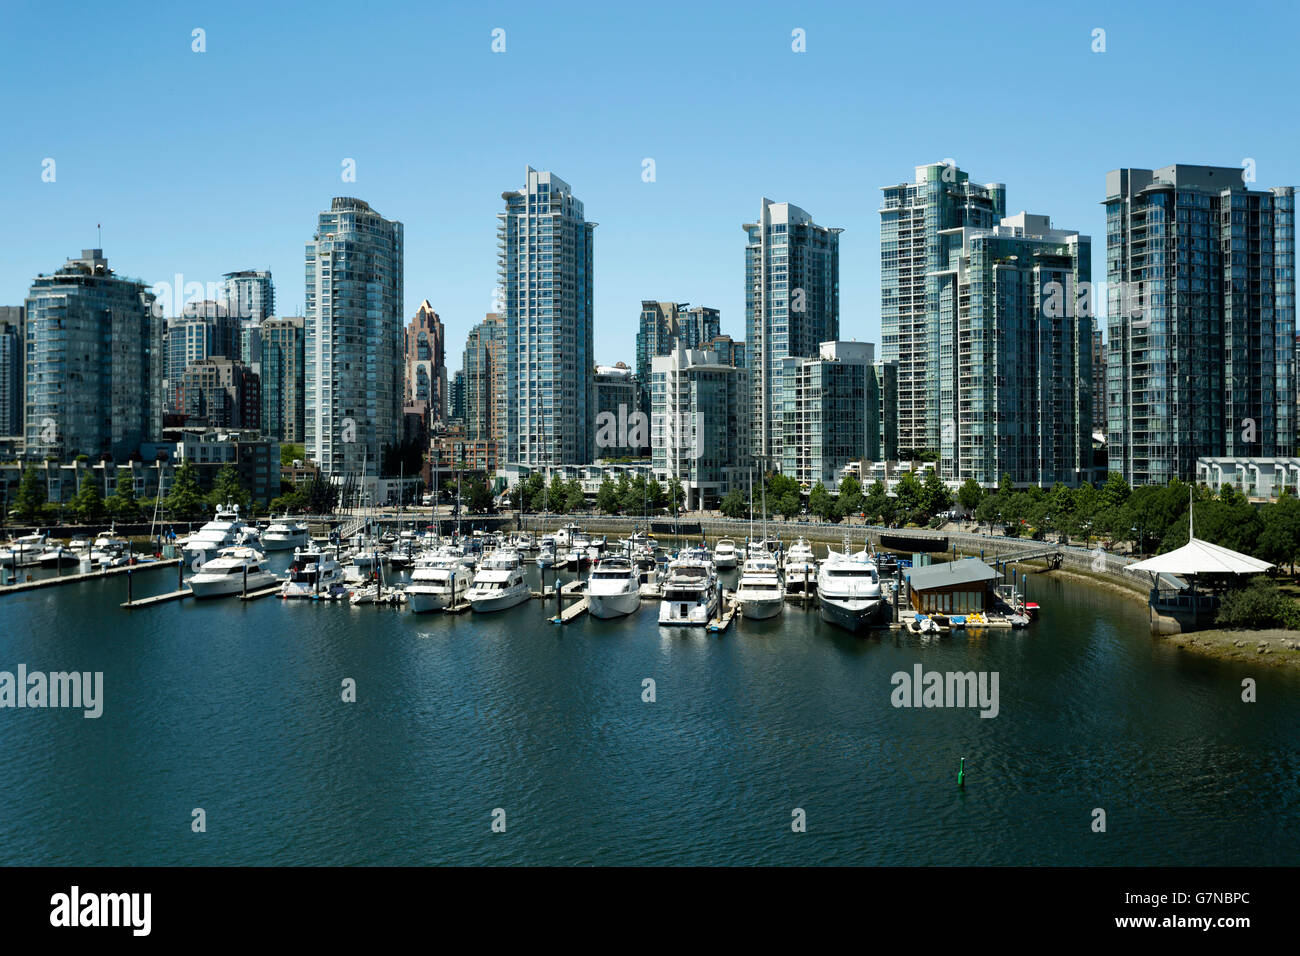 Skyline cityscape overlooking False Creek and Yaletown located in Vancouver, British Columbia, Canada. Stock Photo